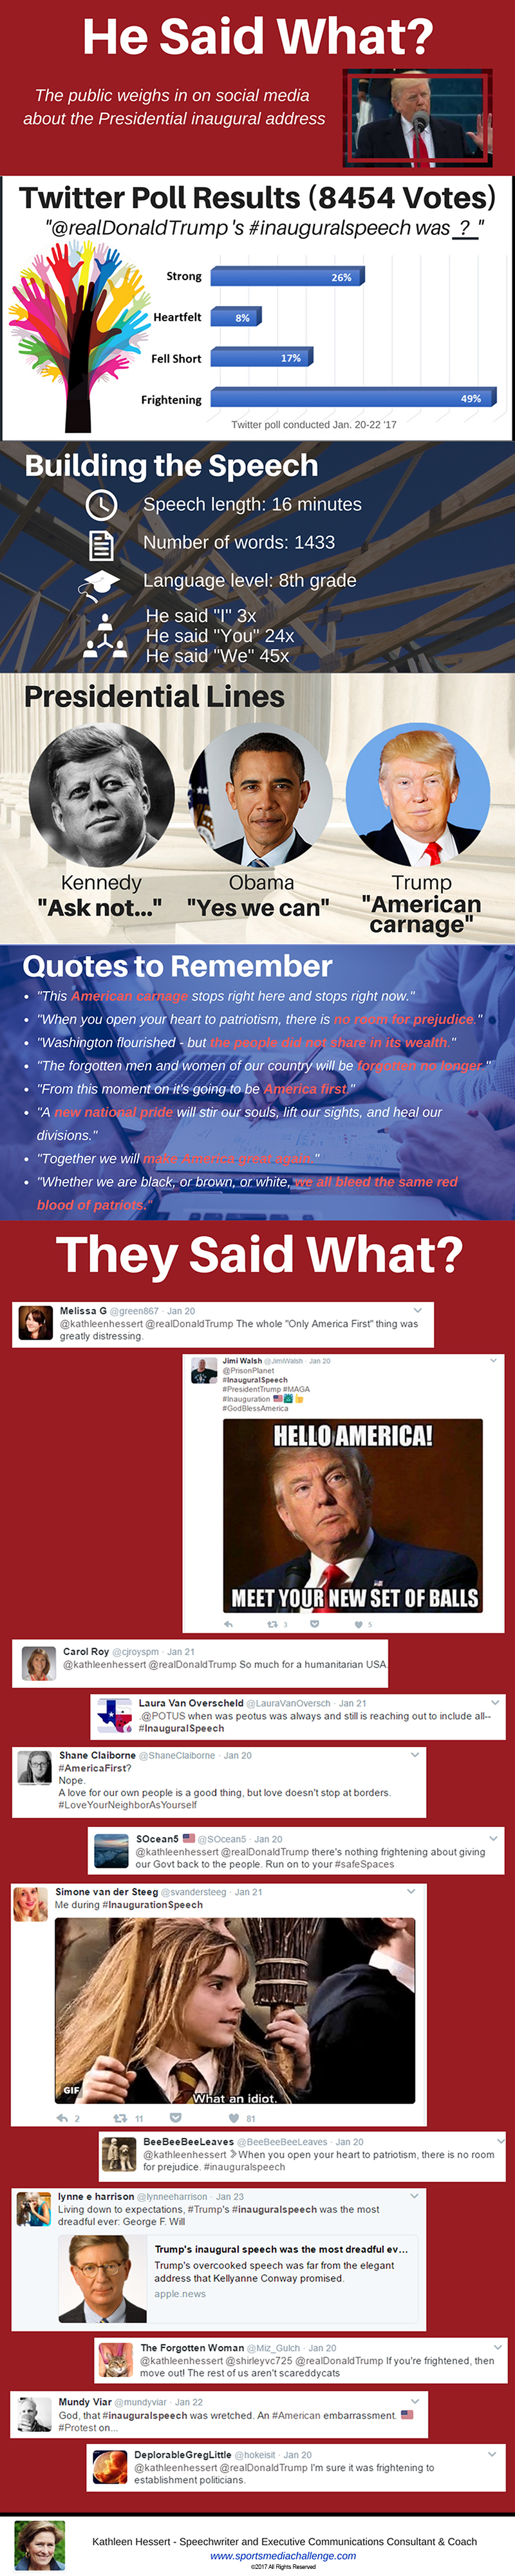 Twitter Poll results - Inauguration speech INFOGRAPHIC